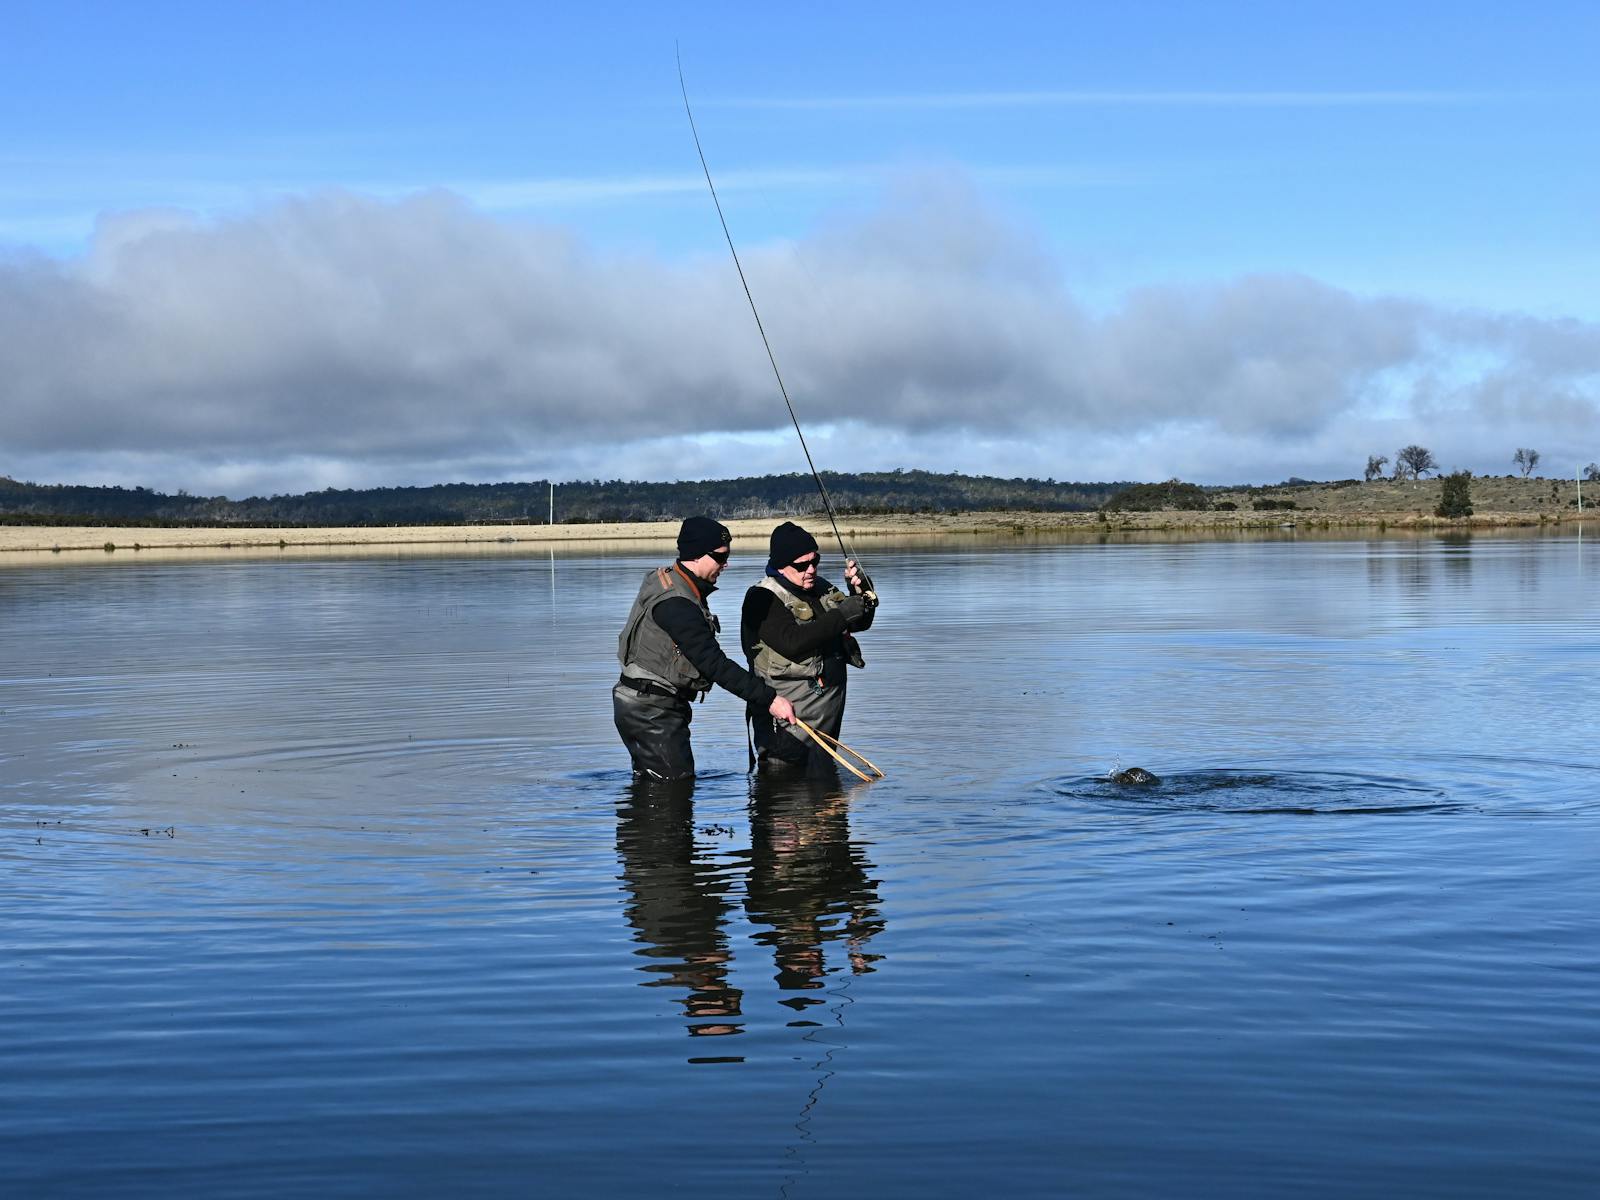 Catching trout in Tasmania